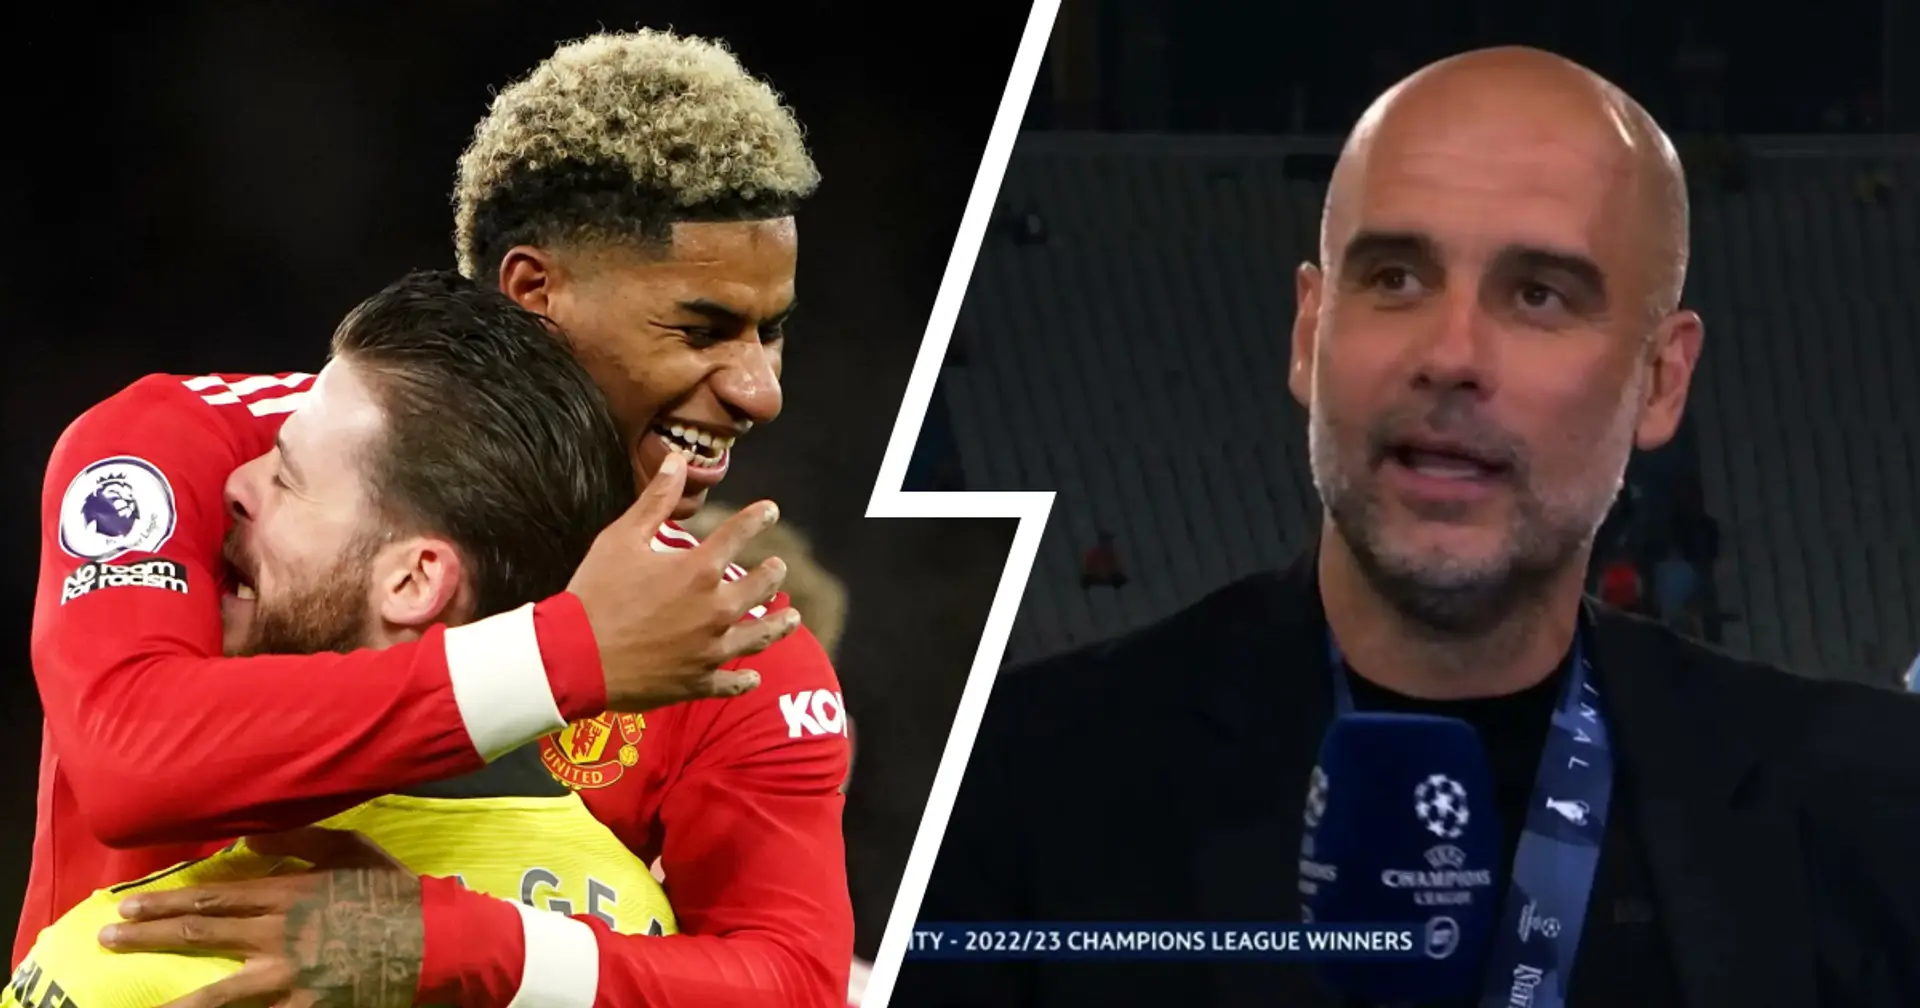 'It's long ball with them': Pep Guardiola bizarrely brings up Man United when talking about Champions League final